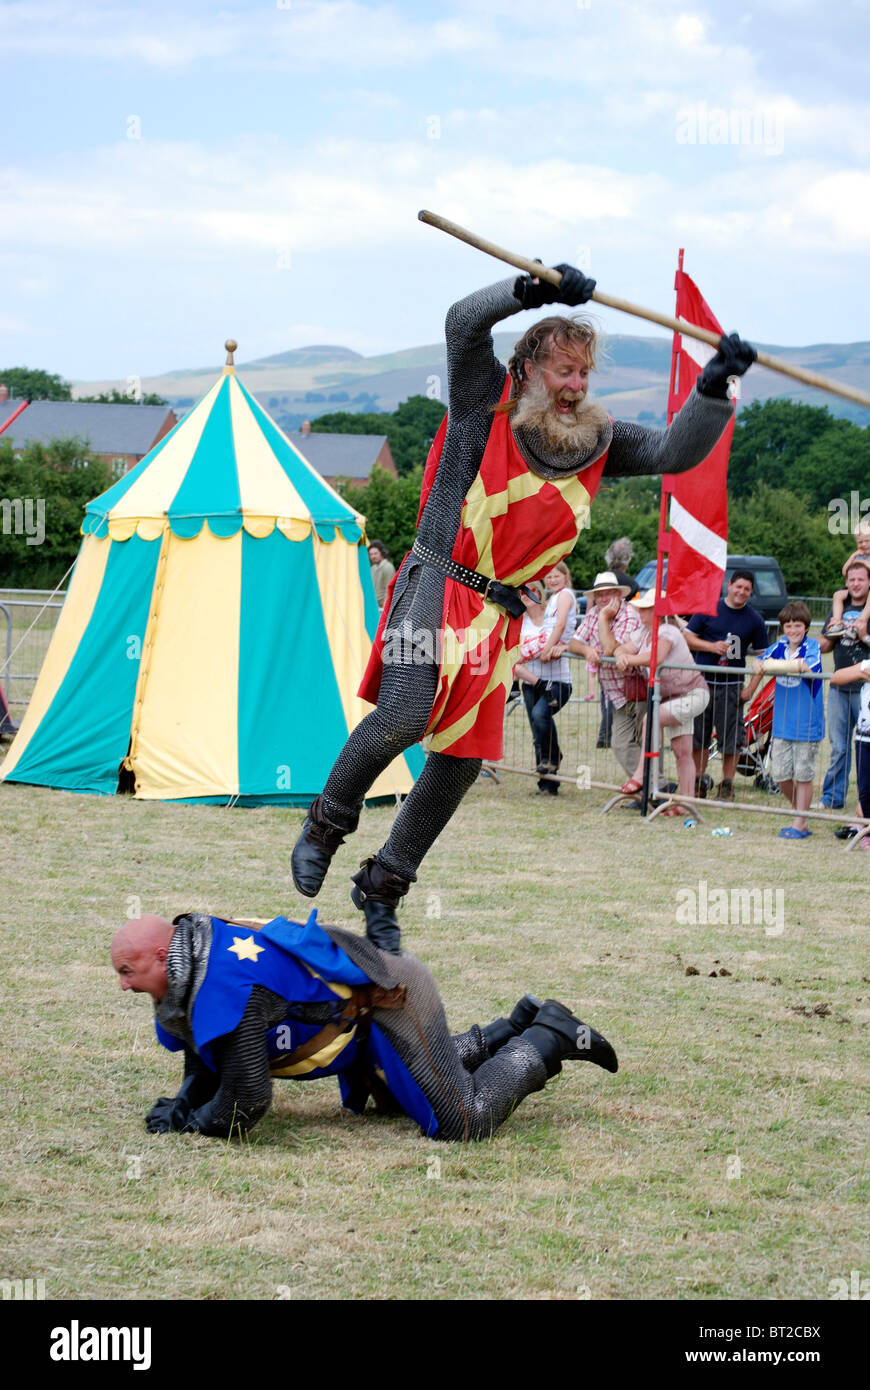 Knight in Armour jumping on an opponents back at a re-enactment event Stock Photo